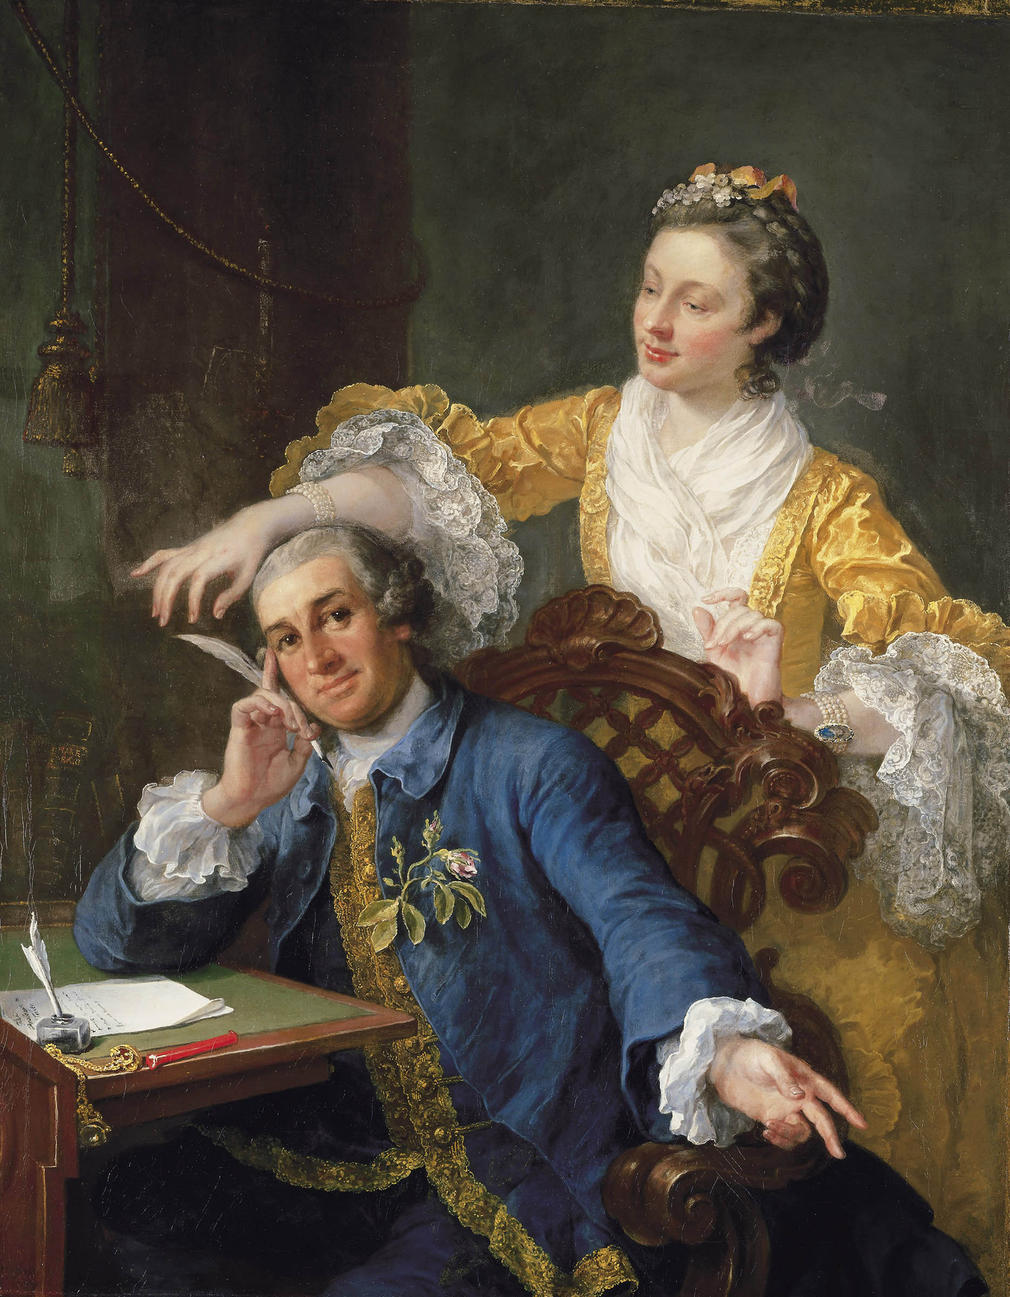 The celebrated actor-manager David Garrick (1717-79) was one of the most frequently painted subjects in eighteenth-century Britain. Despite their close friendship, formed after Hogarth painted Garrick as the King in William Shakespeare's Richard III in 17